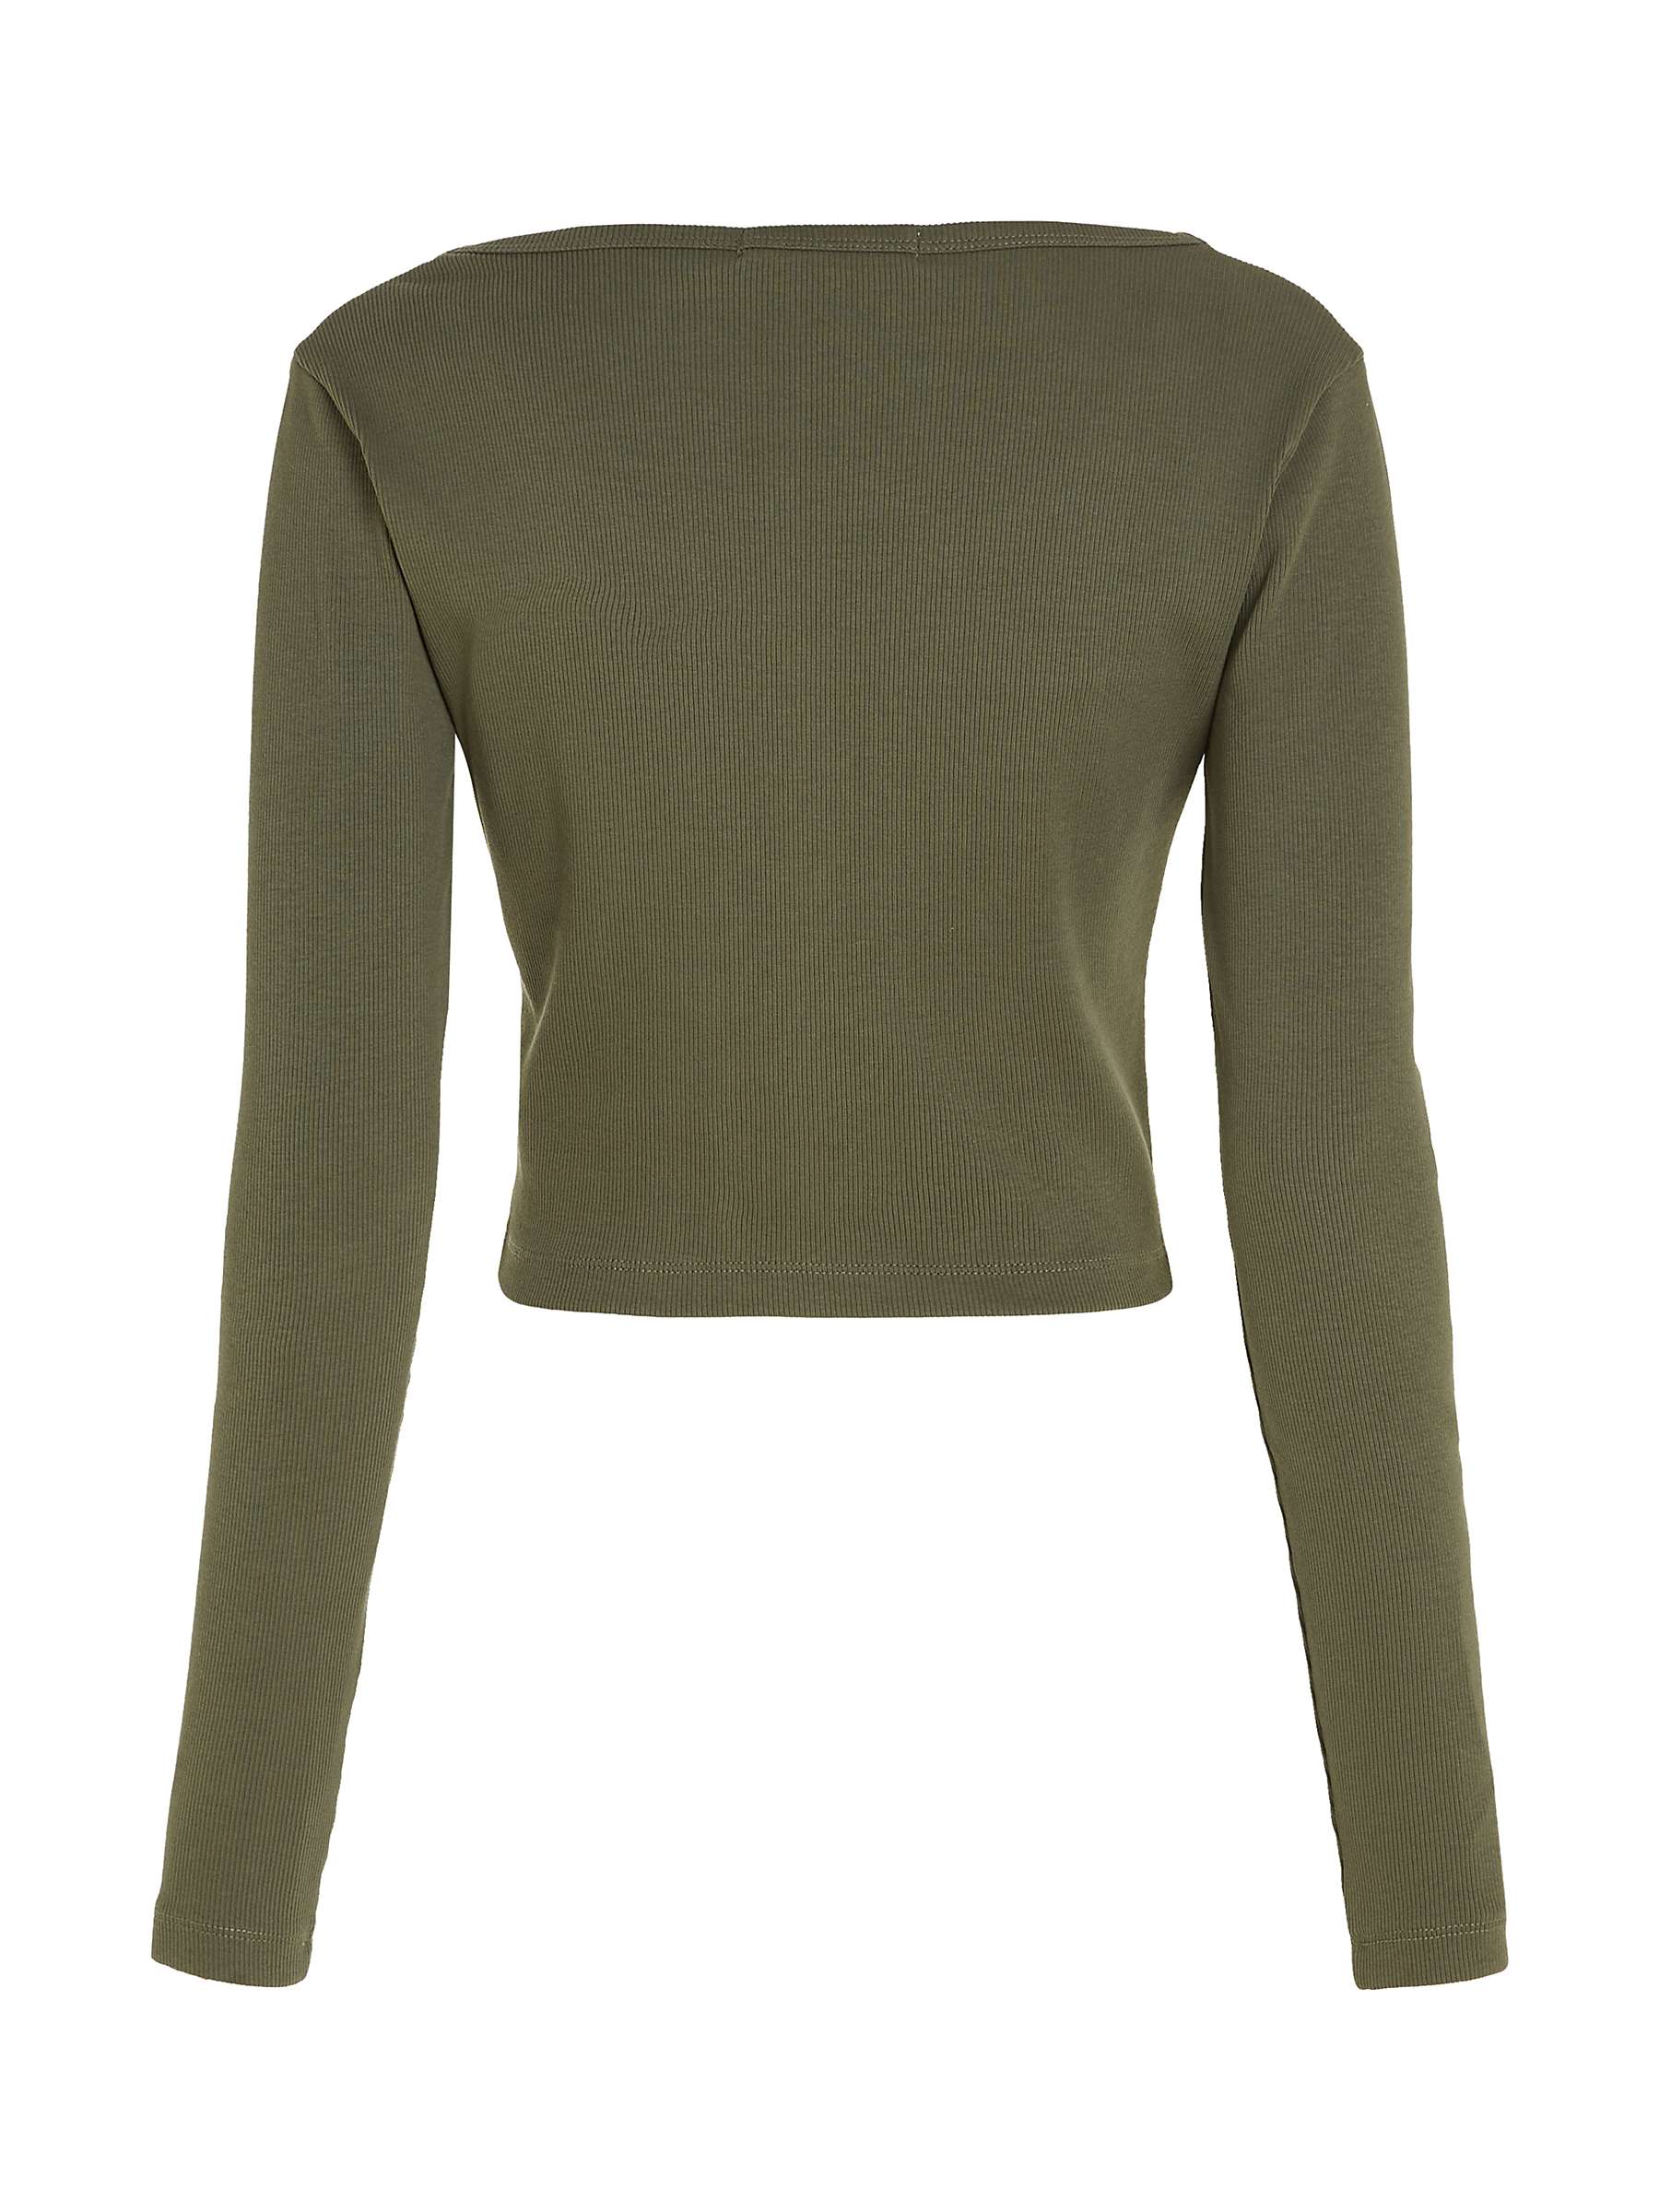 Buy Calvin Klein Jeans Woven Label Cardigan, Dusty Olive Online at johnlewis.com